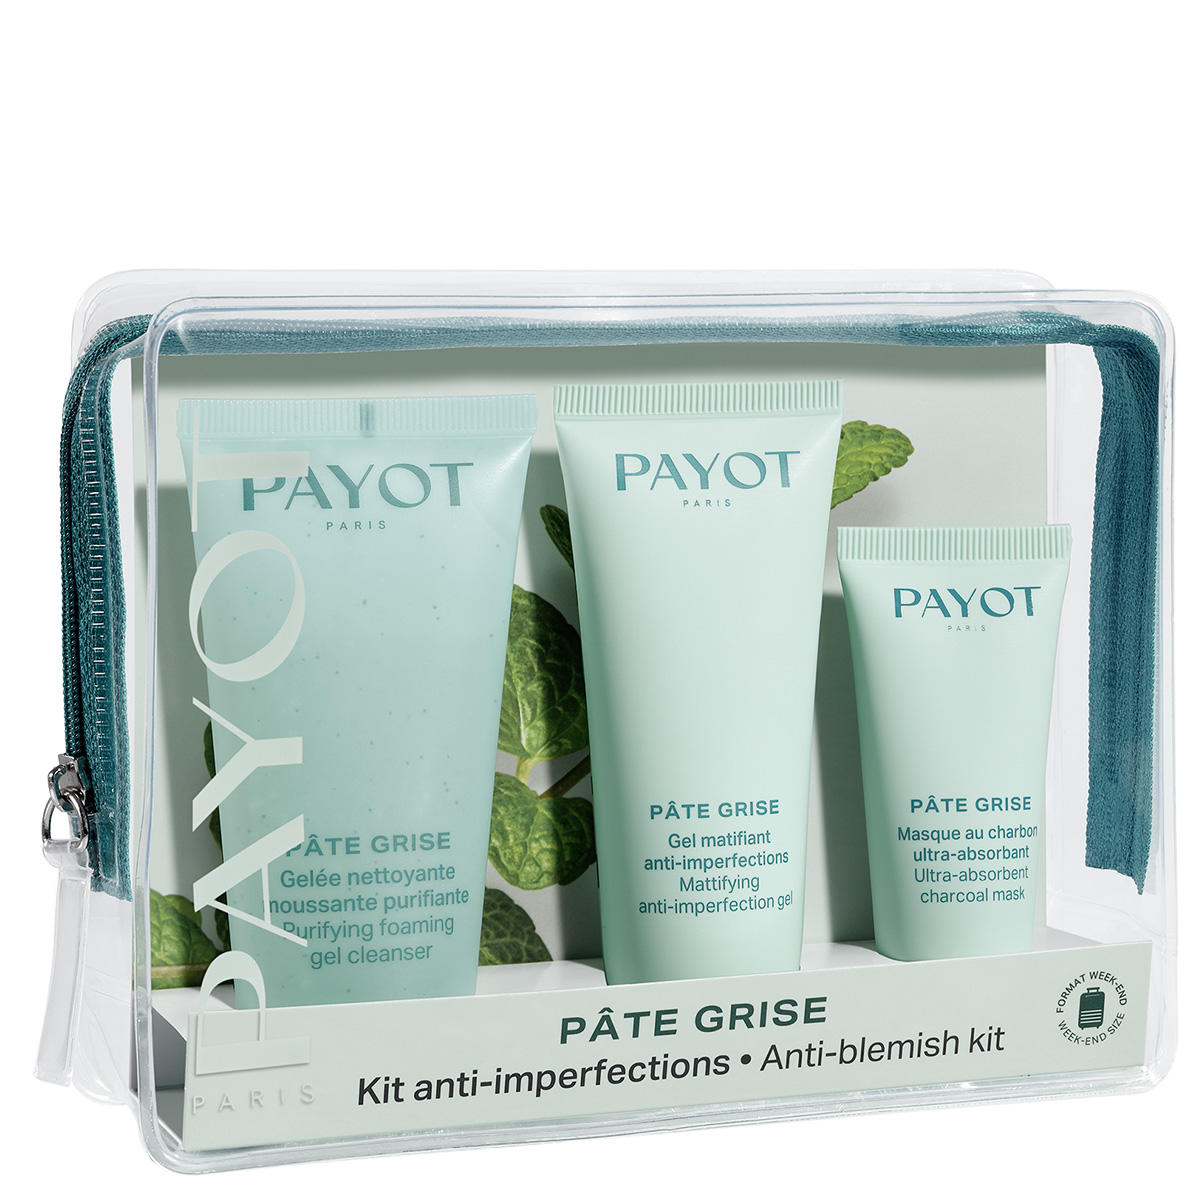 Payot Pâte Grise Kit anti-imperfections Limited Edition  - 1